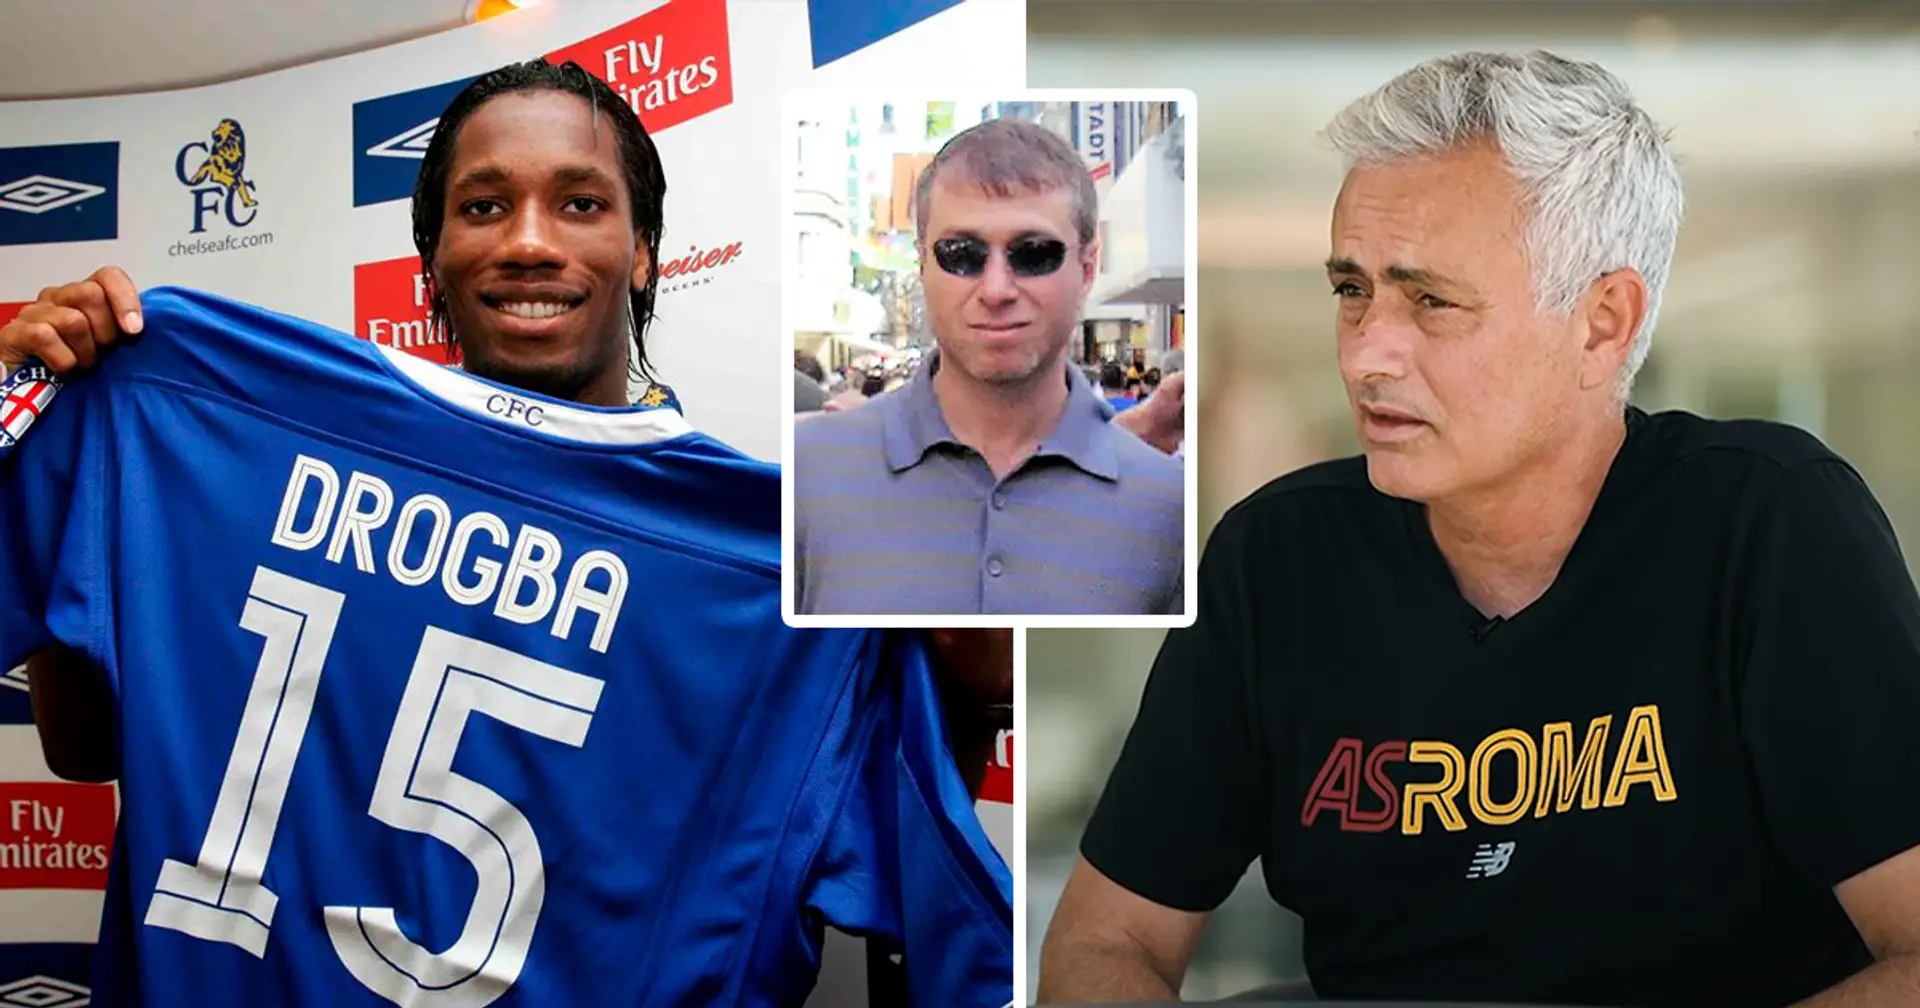 'Who? Who is he? Where is he playing?': Jose Mourinho reveals how he convinced Roman Abramovich to sign Didier Drogba in 2004